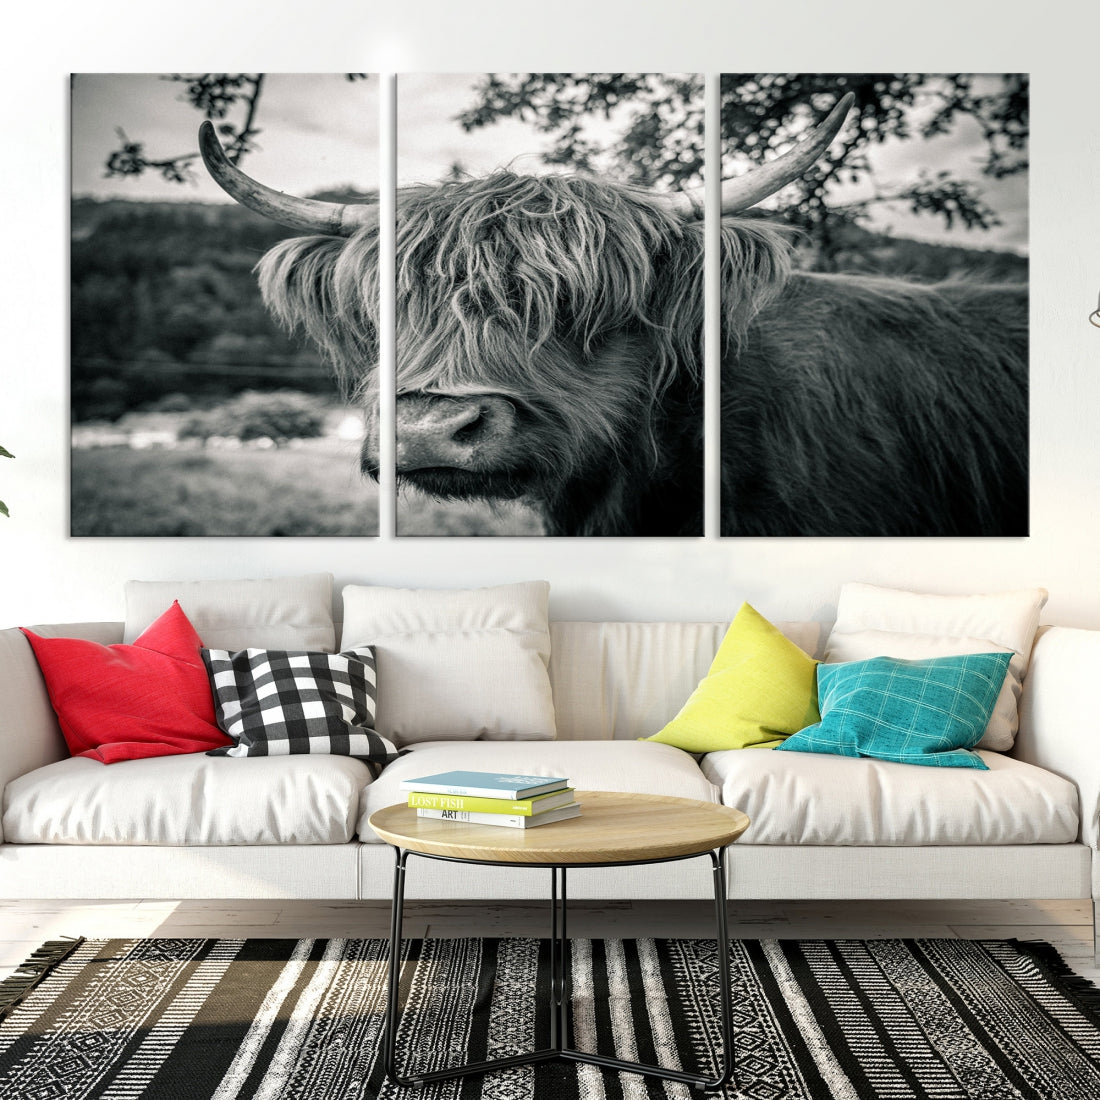 Beautiful Highland Cow Wall Art Large Canvas Print Black and White Wall Decor